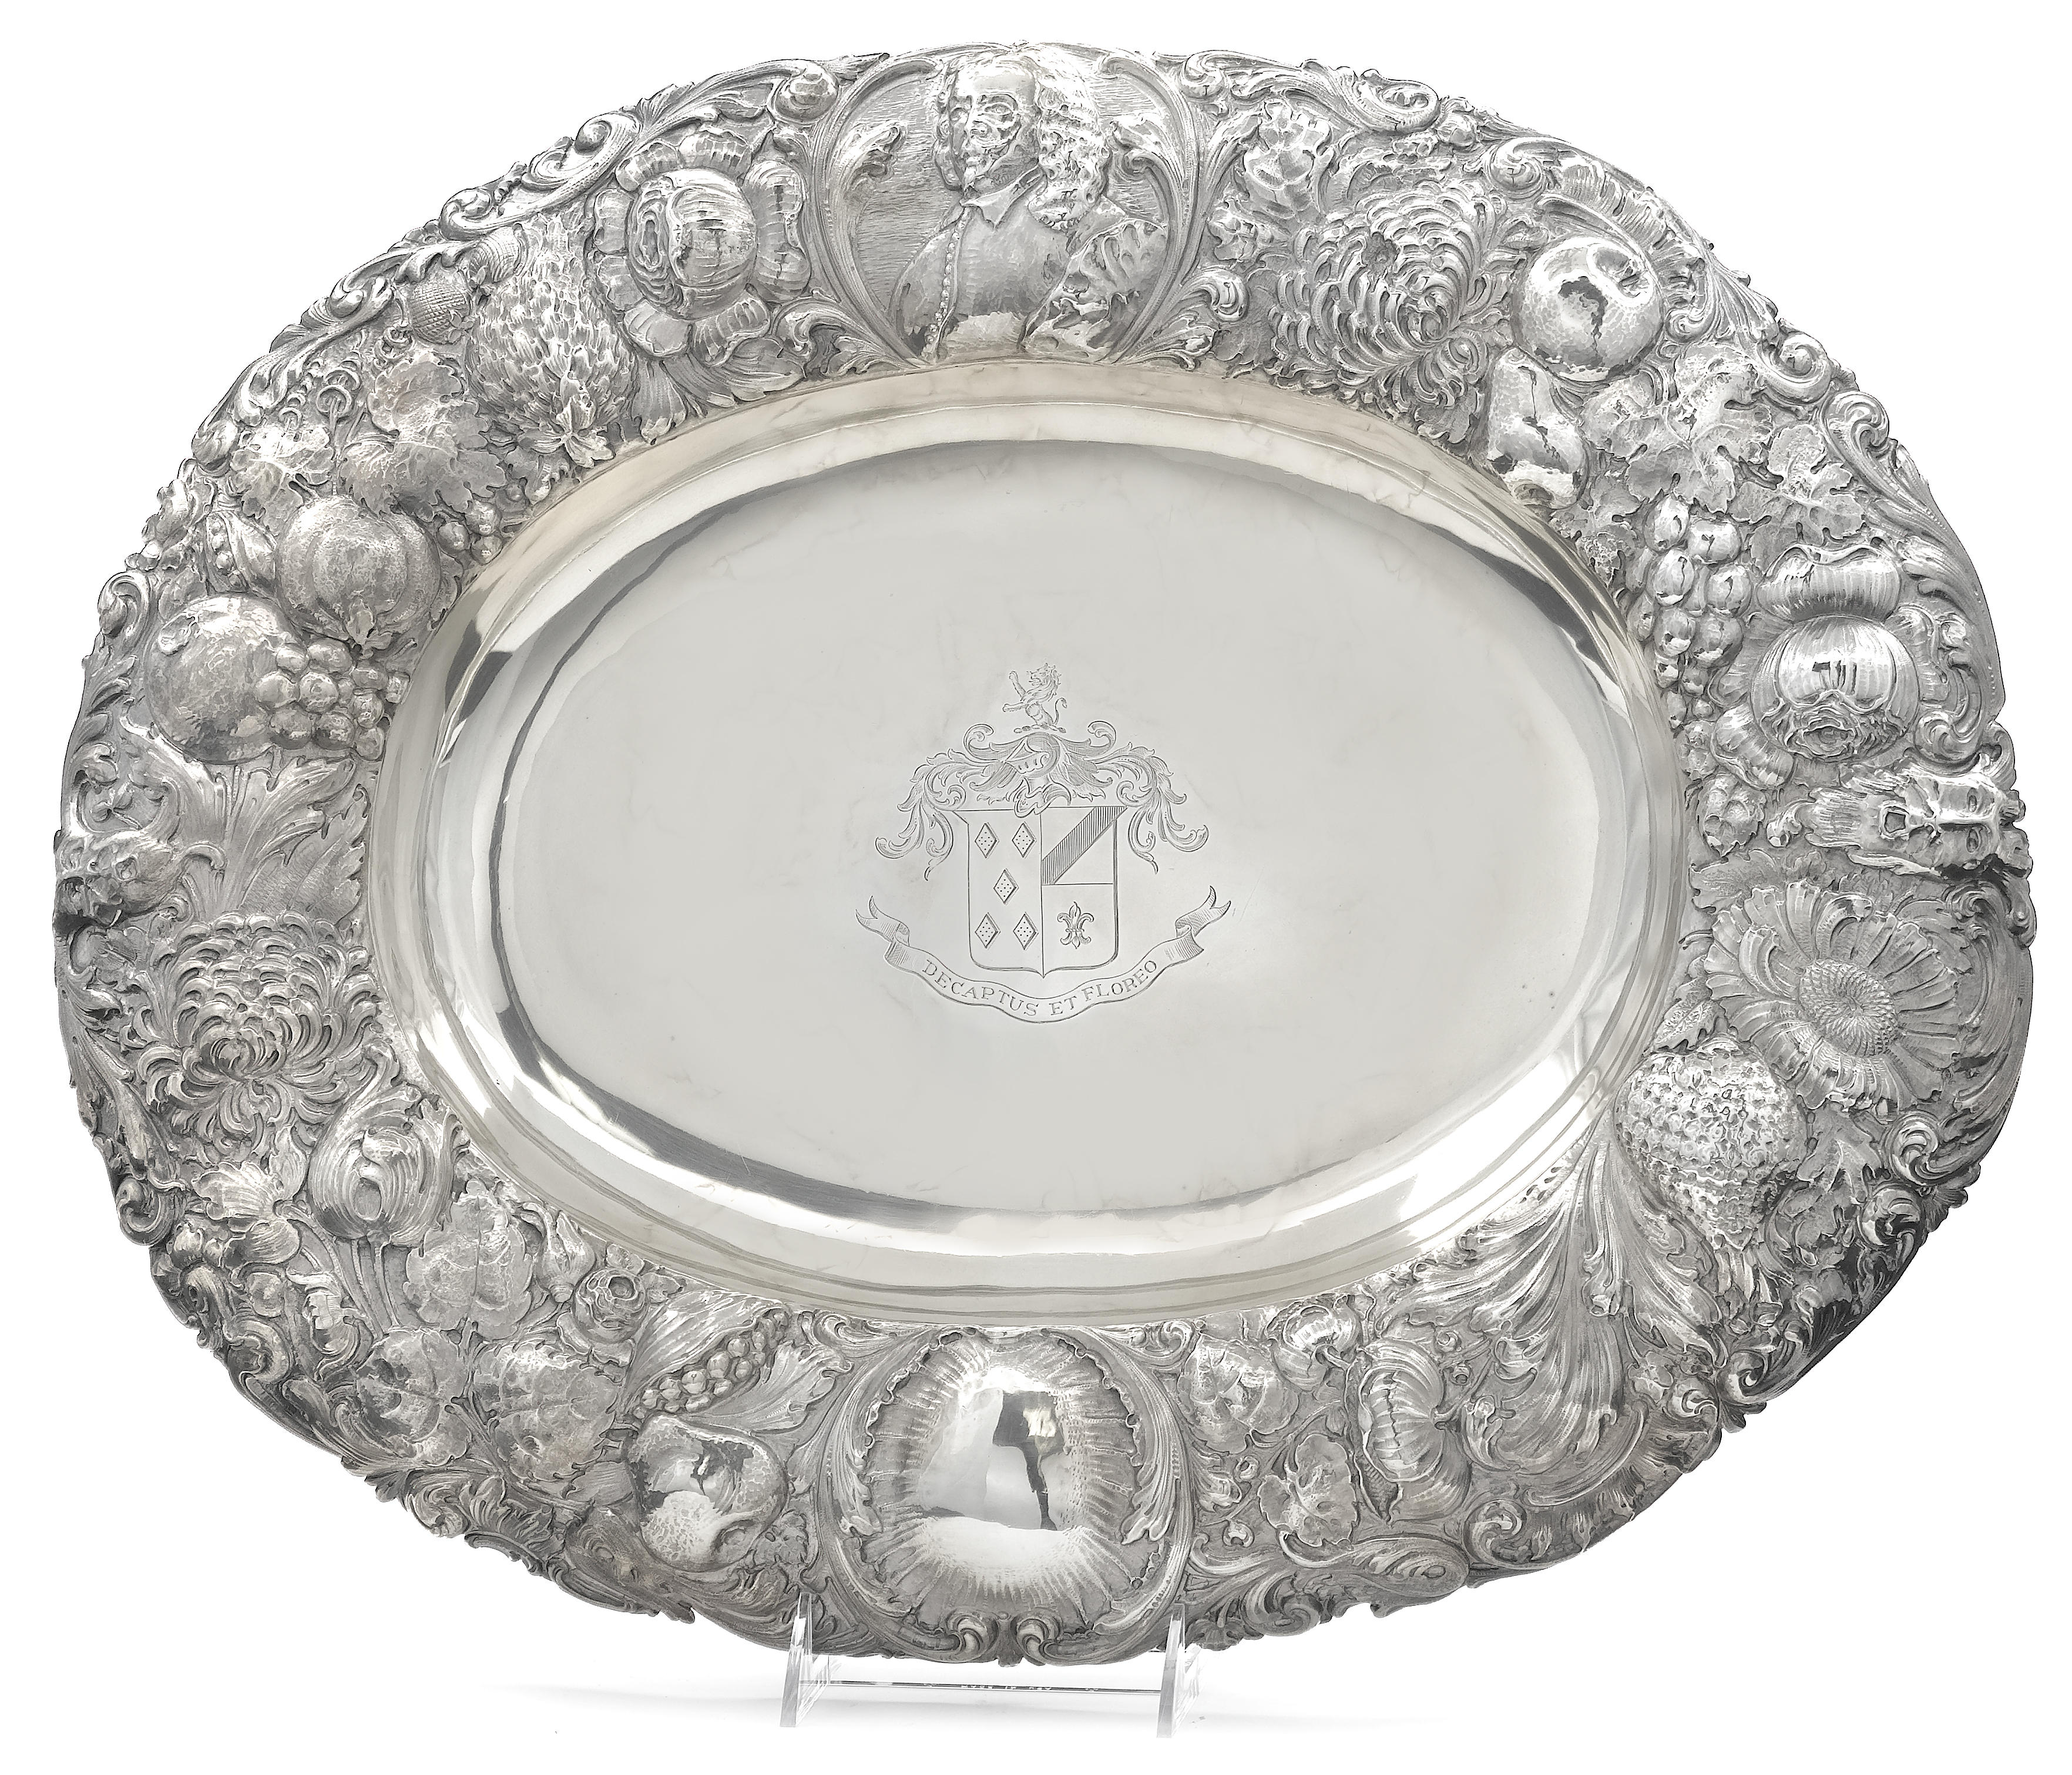 A silver footed oval bowl with 129110